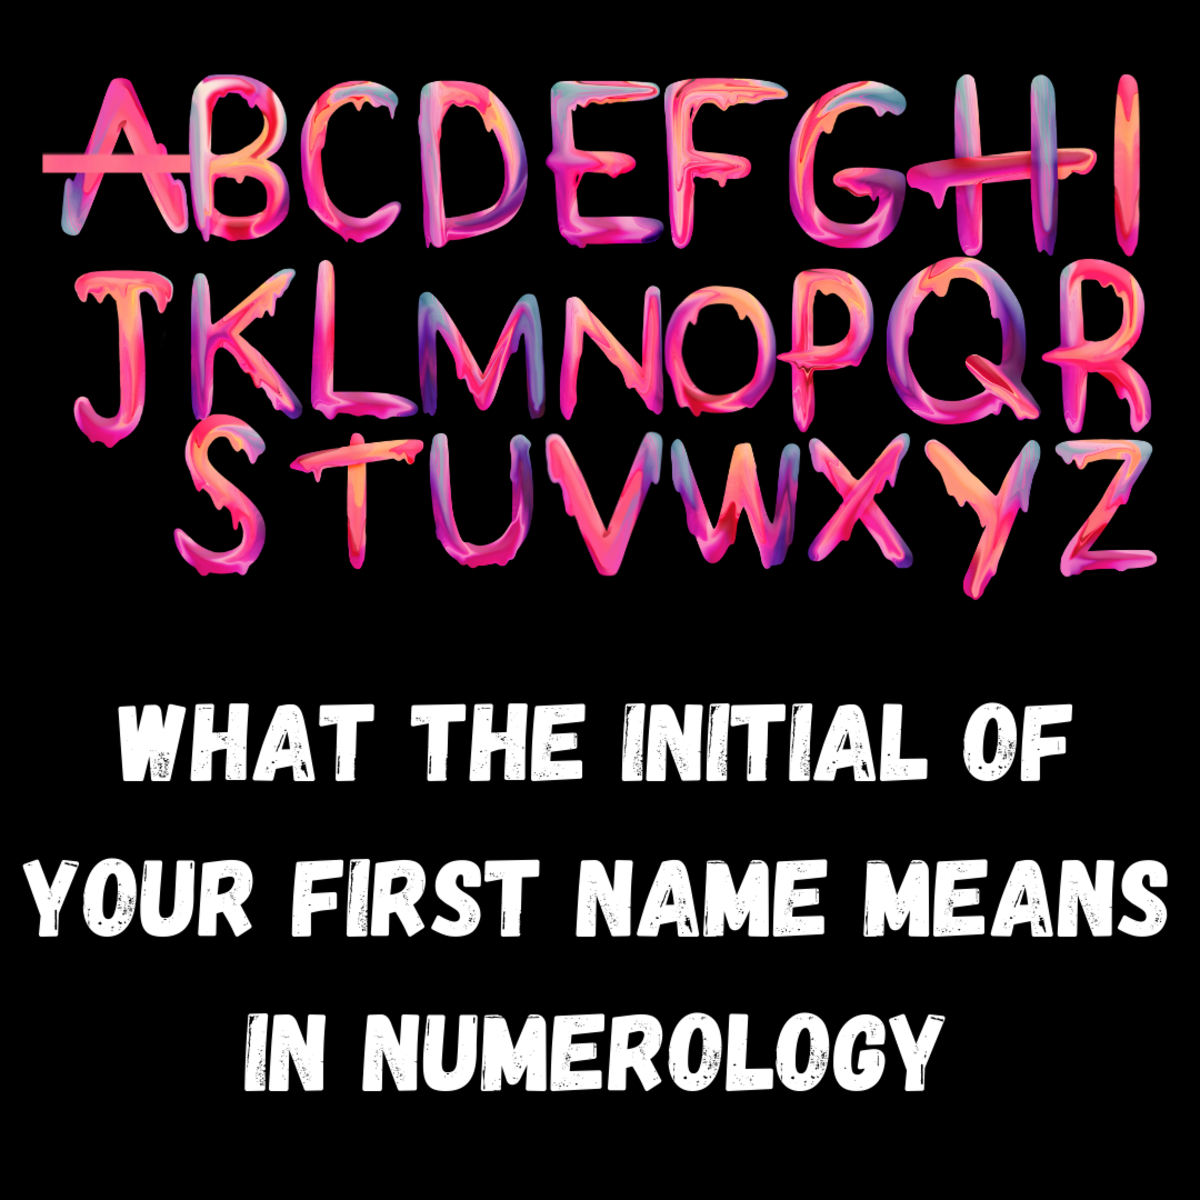 What the Initial of Your First Name Means in Numerology